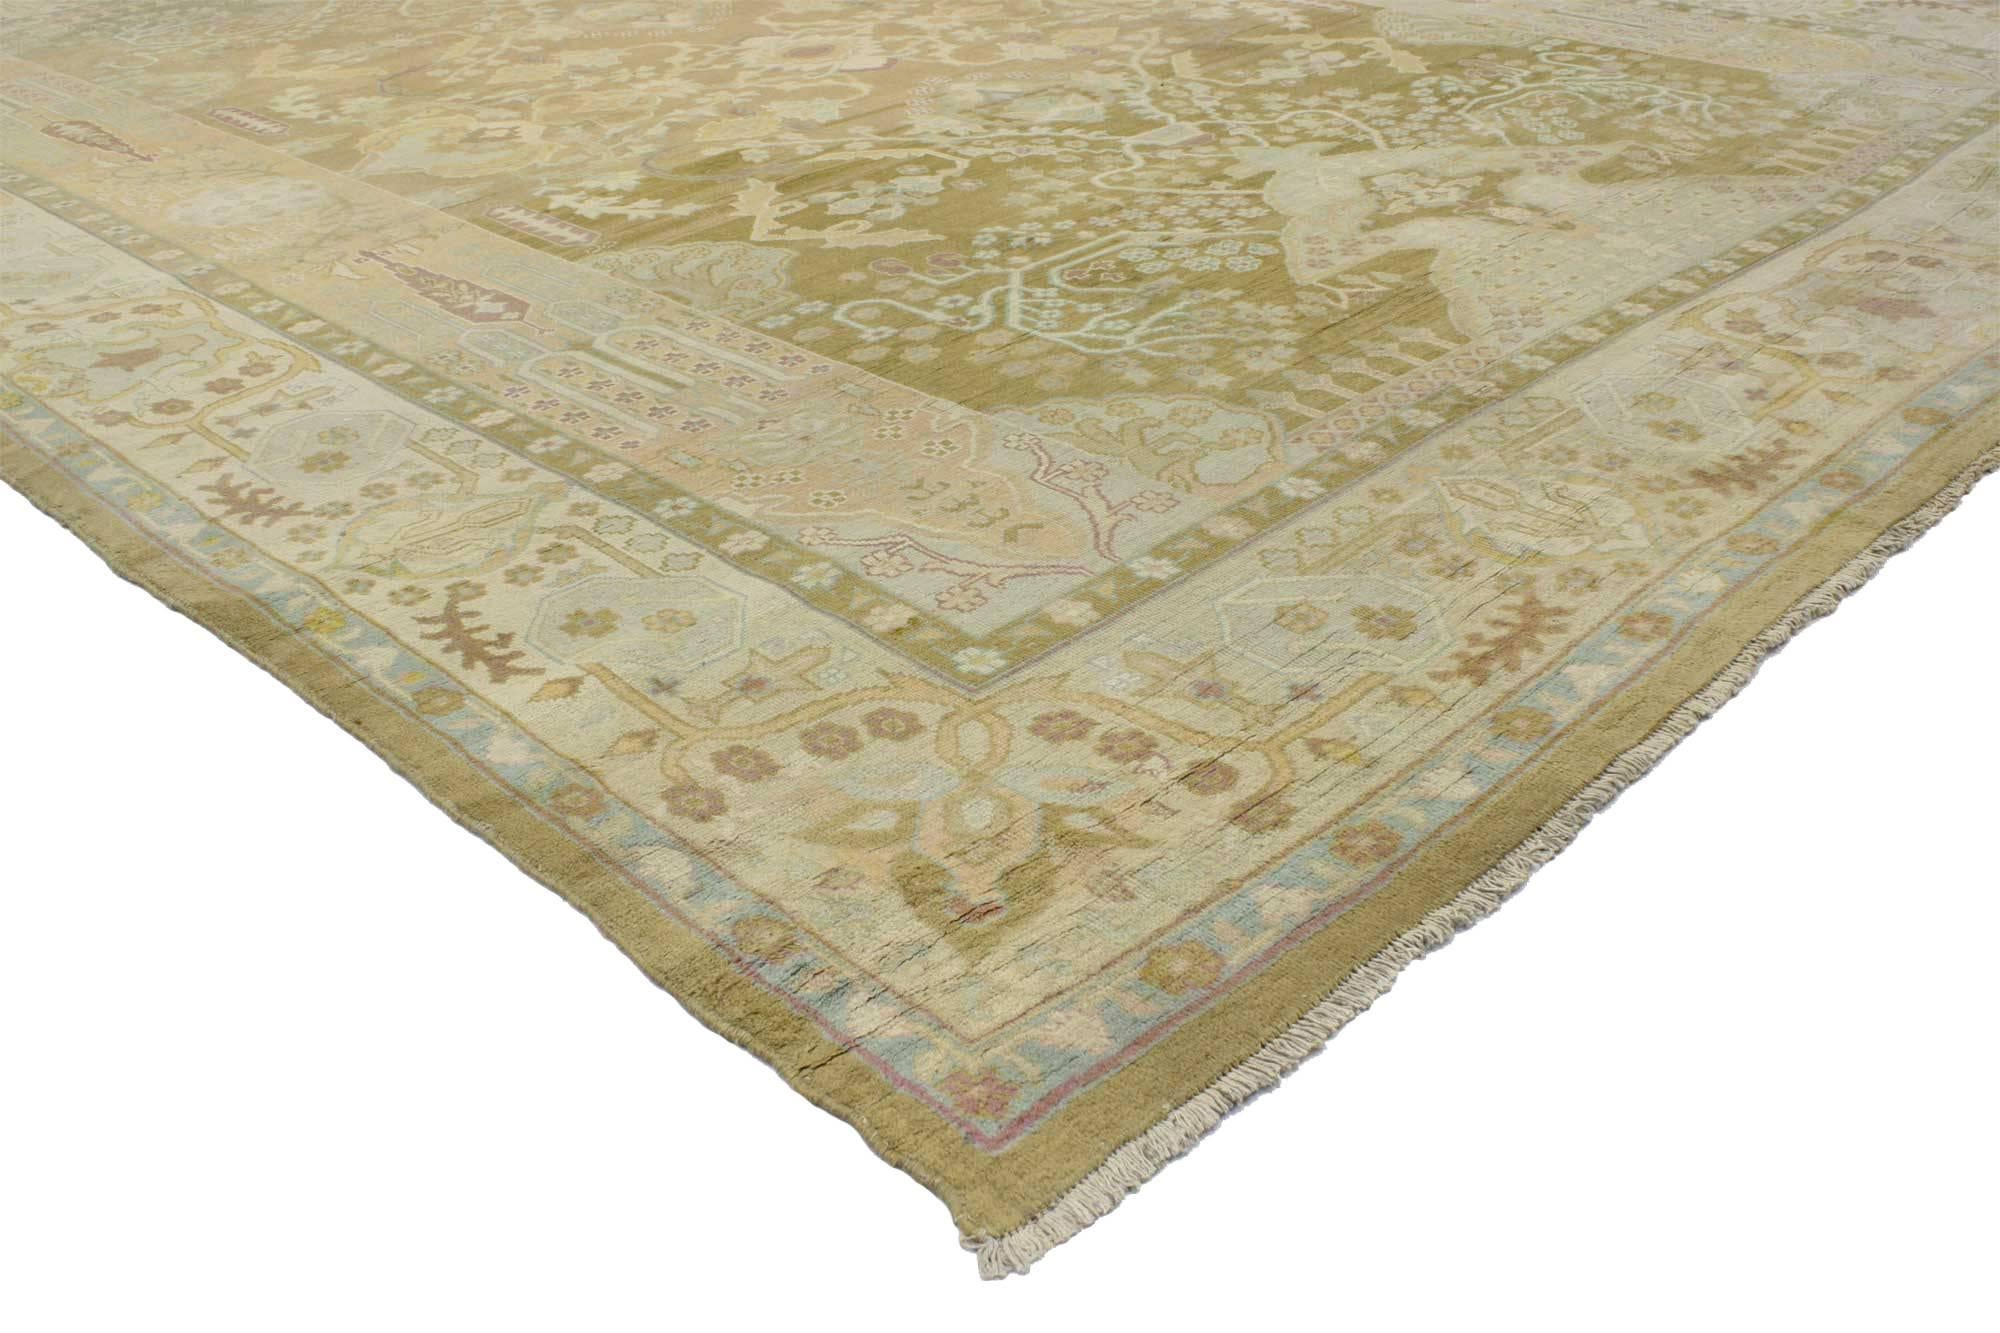 73595 Antique Indian Area Rug 09'09 x 12'05. Quiet luxurious beauty and soft, bespoke vibes, this hand-knotted wool antique Indian Agra features an extravagant geometric design with grand scale motifs in soft earth-toned colors. Rich waves of abrash